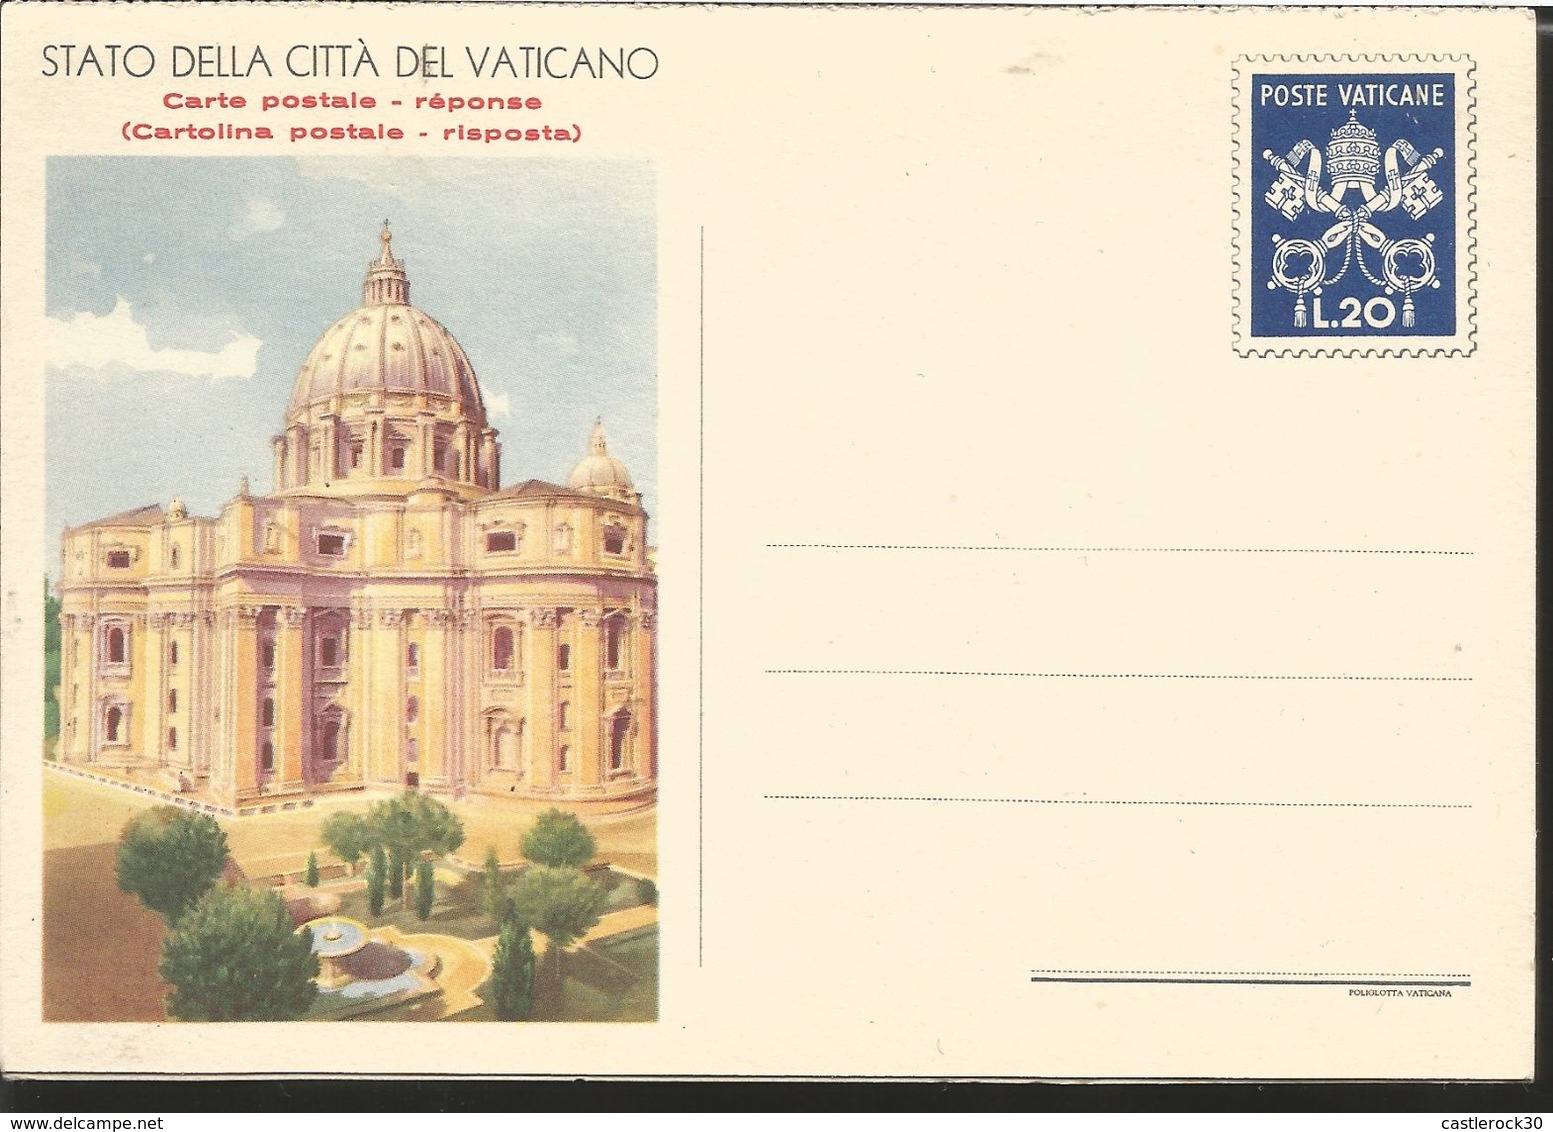 J) 2016 VATICAN CITY, VATICAN CITY STATE, CHURCHES, WITH REPLI CARD, POSTAL STATIONARY - Covers & Documents